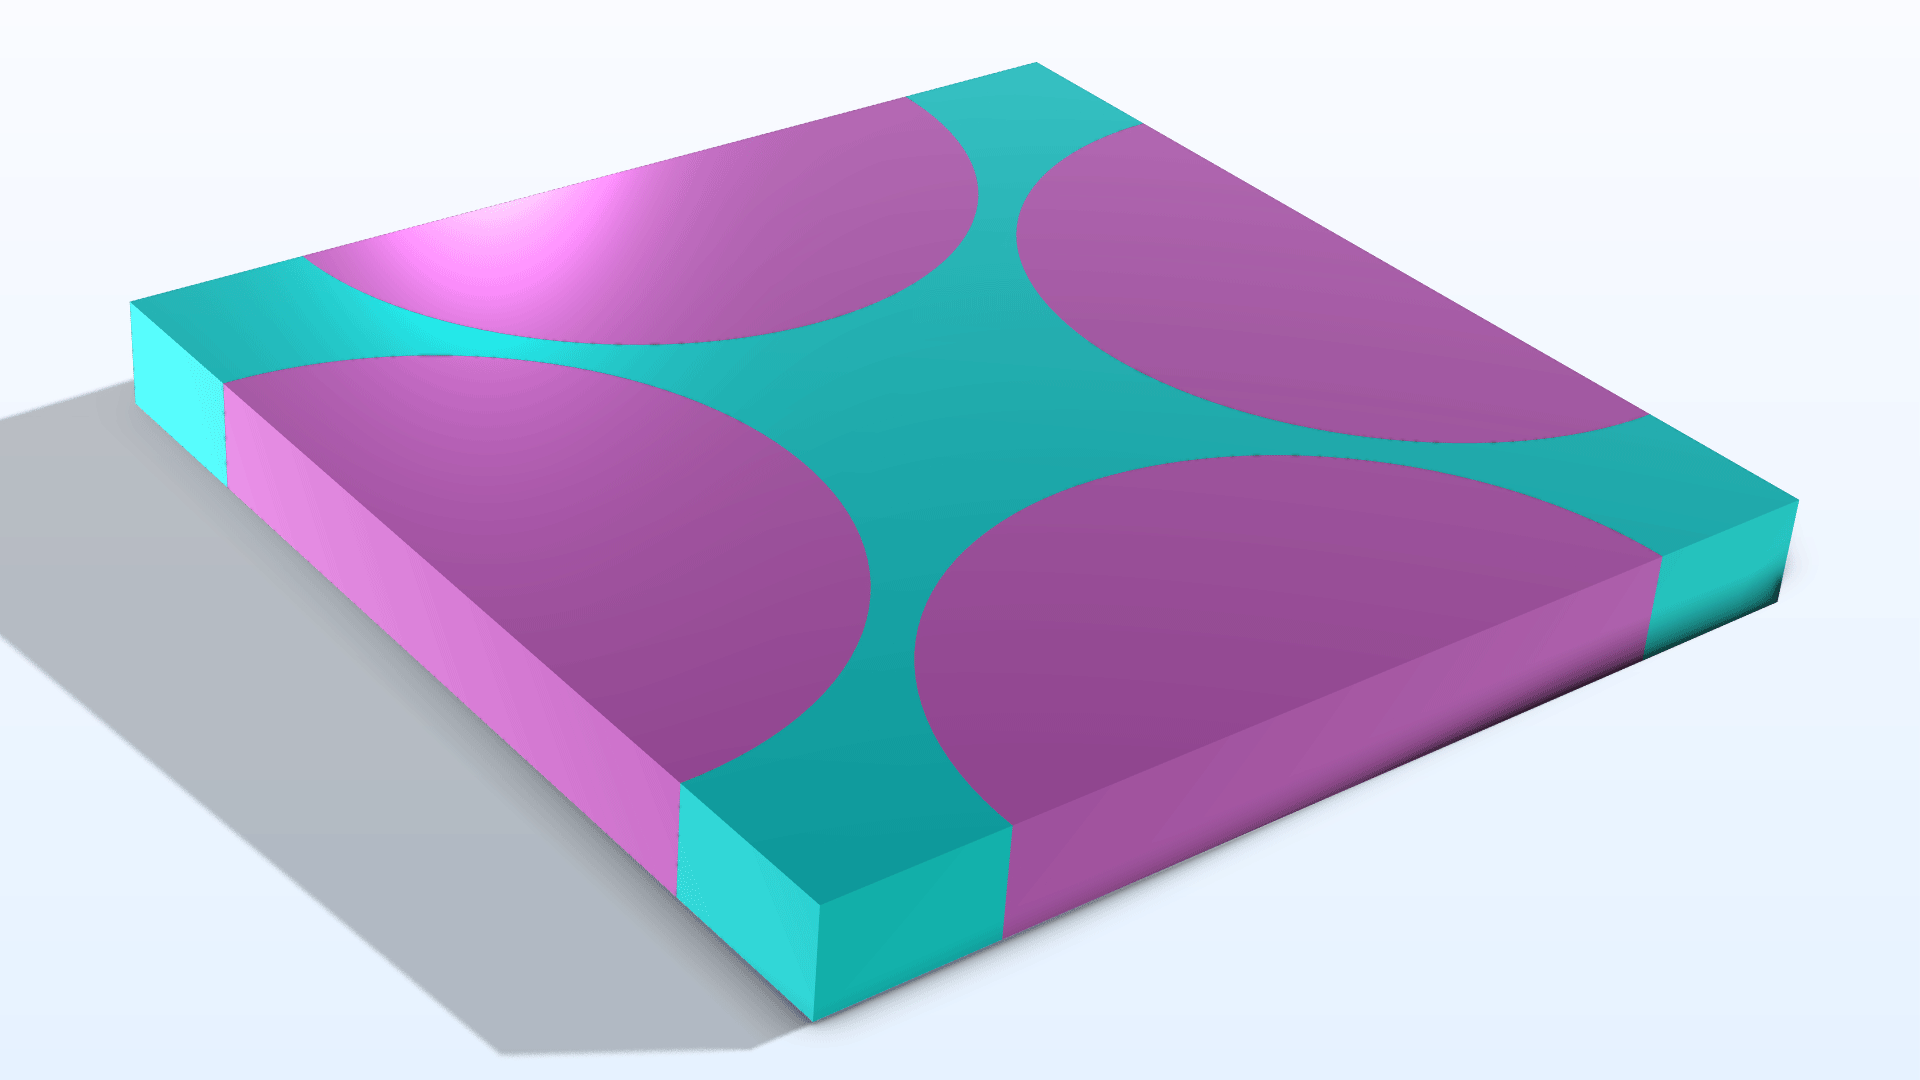 A composite model in teal and pink.